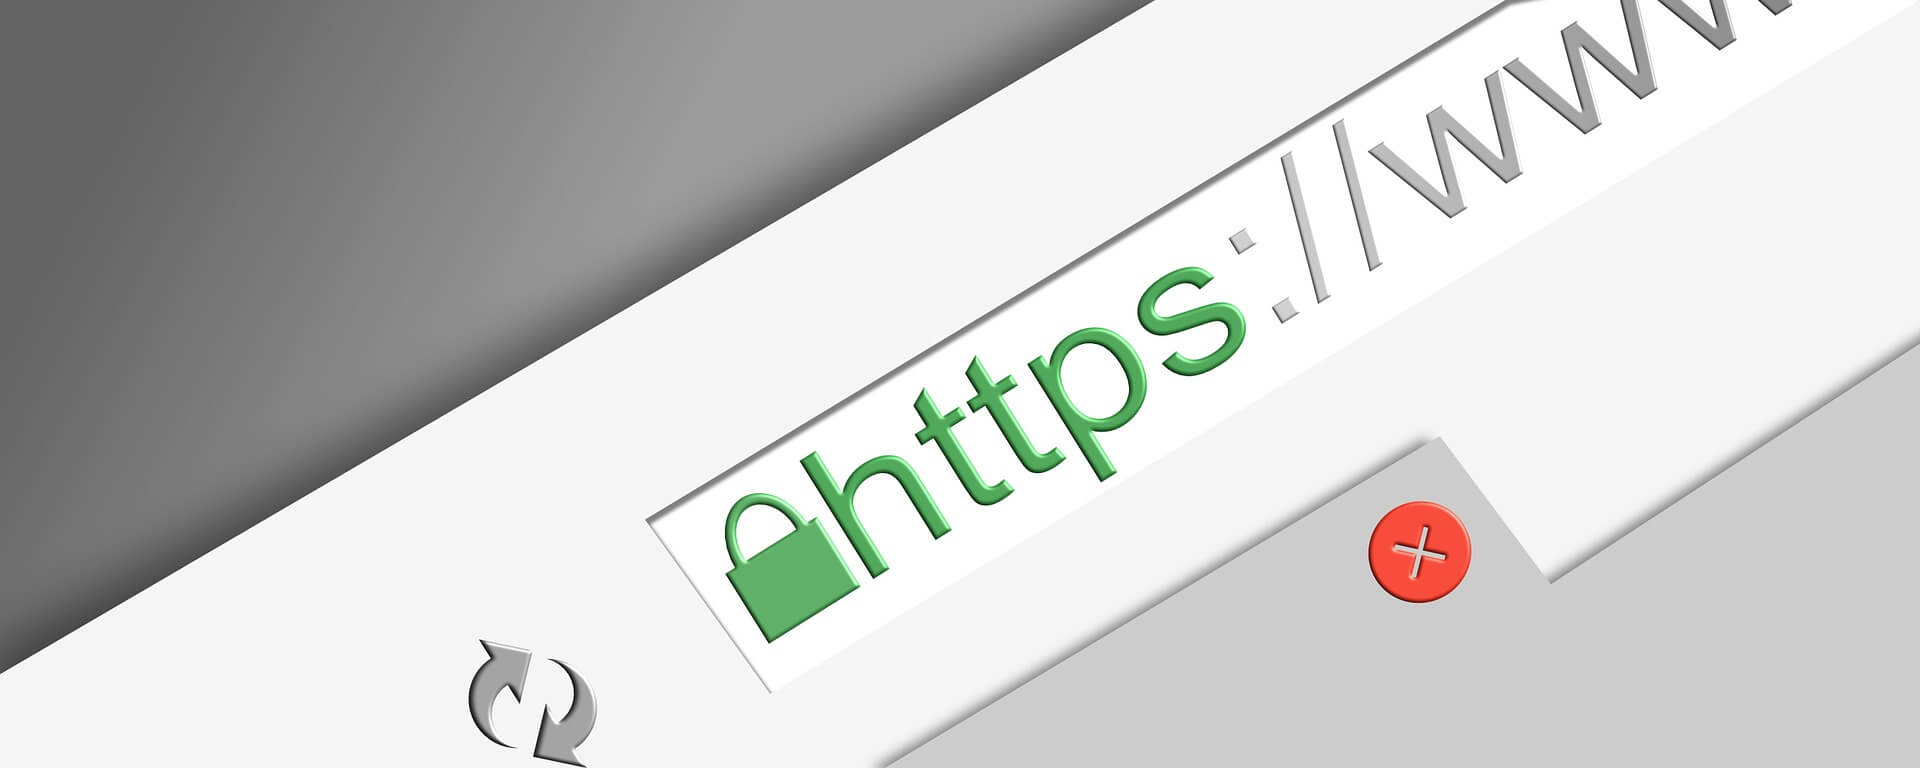 Schematic illustration of the necessity to transition from HTTP to HTTPS for website connections.